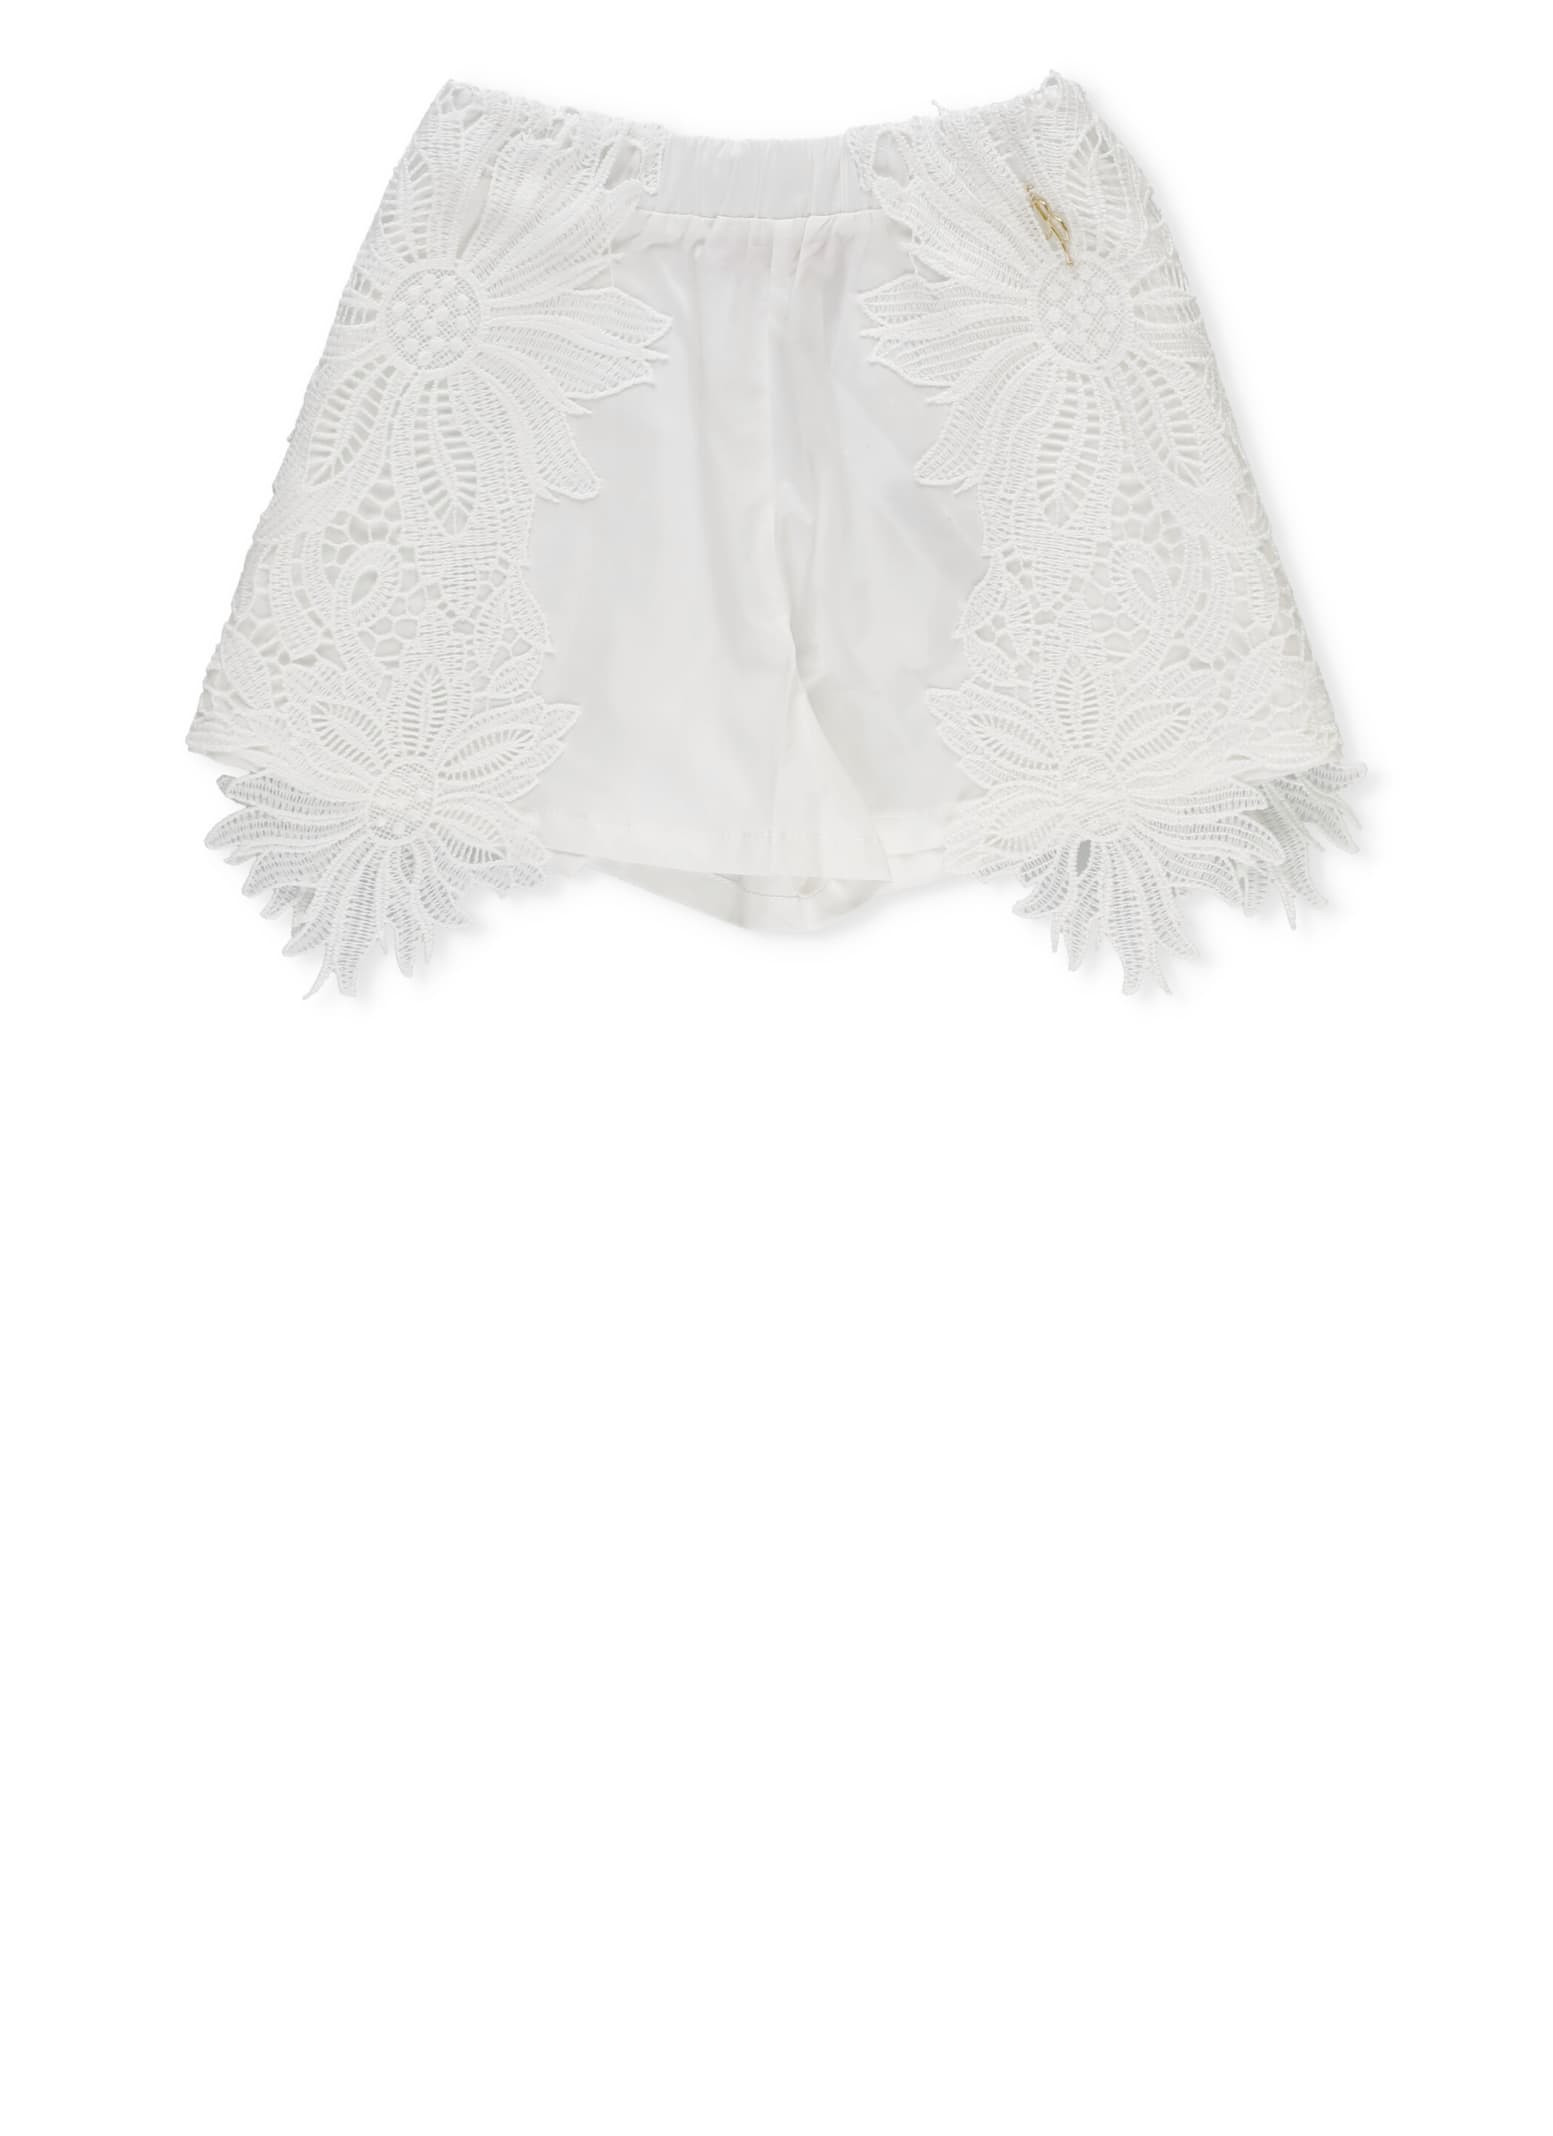 MISS BLUMARINE SHORTS WITH LACES